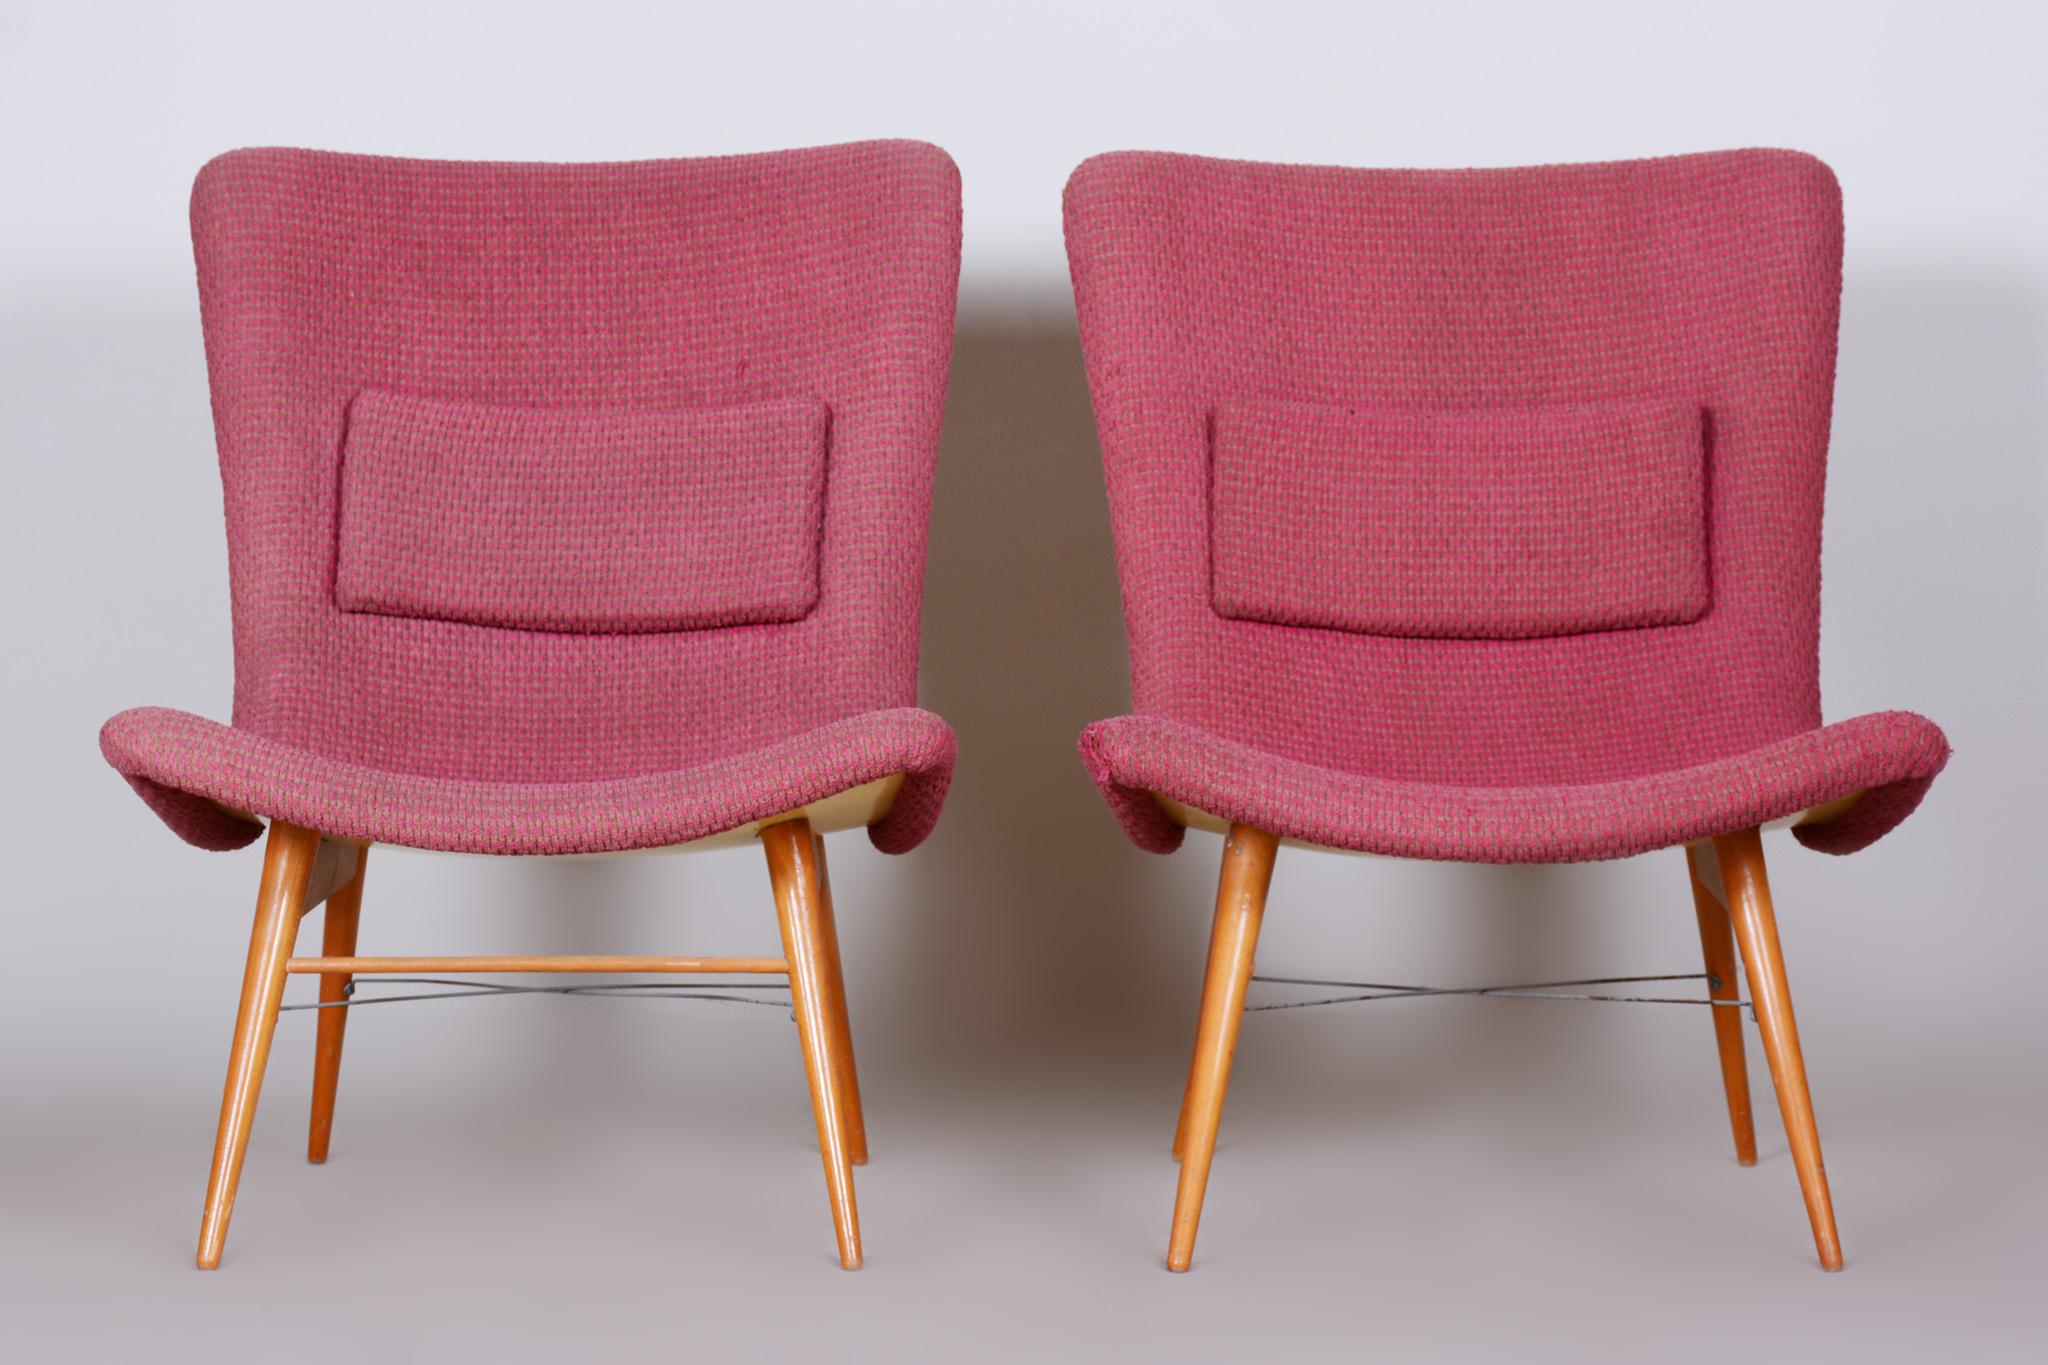 Original pair of midcentury armchairs by Miroslav Navratil.

Source: Czechia
Period: 1950-1950
Material: Beech, Laminate

Original well-preserved condition.
Professionally cleaned original fabric.
 